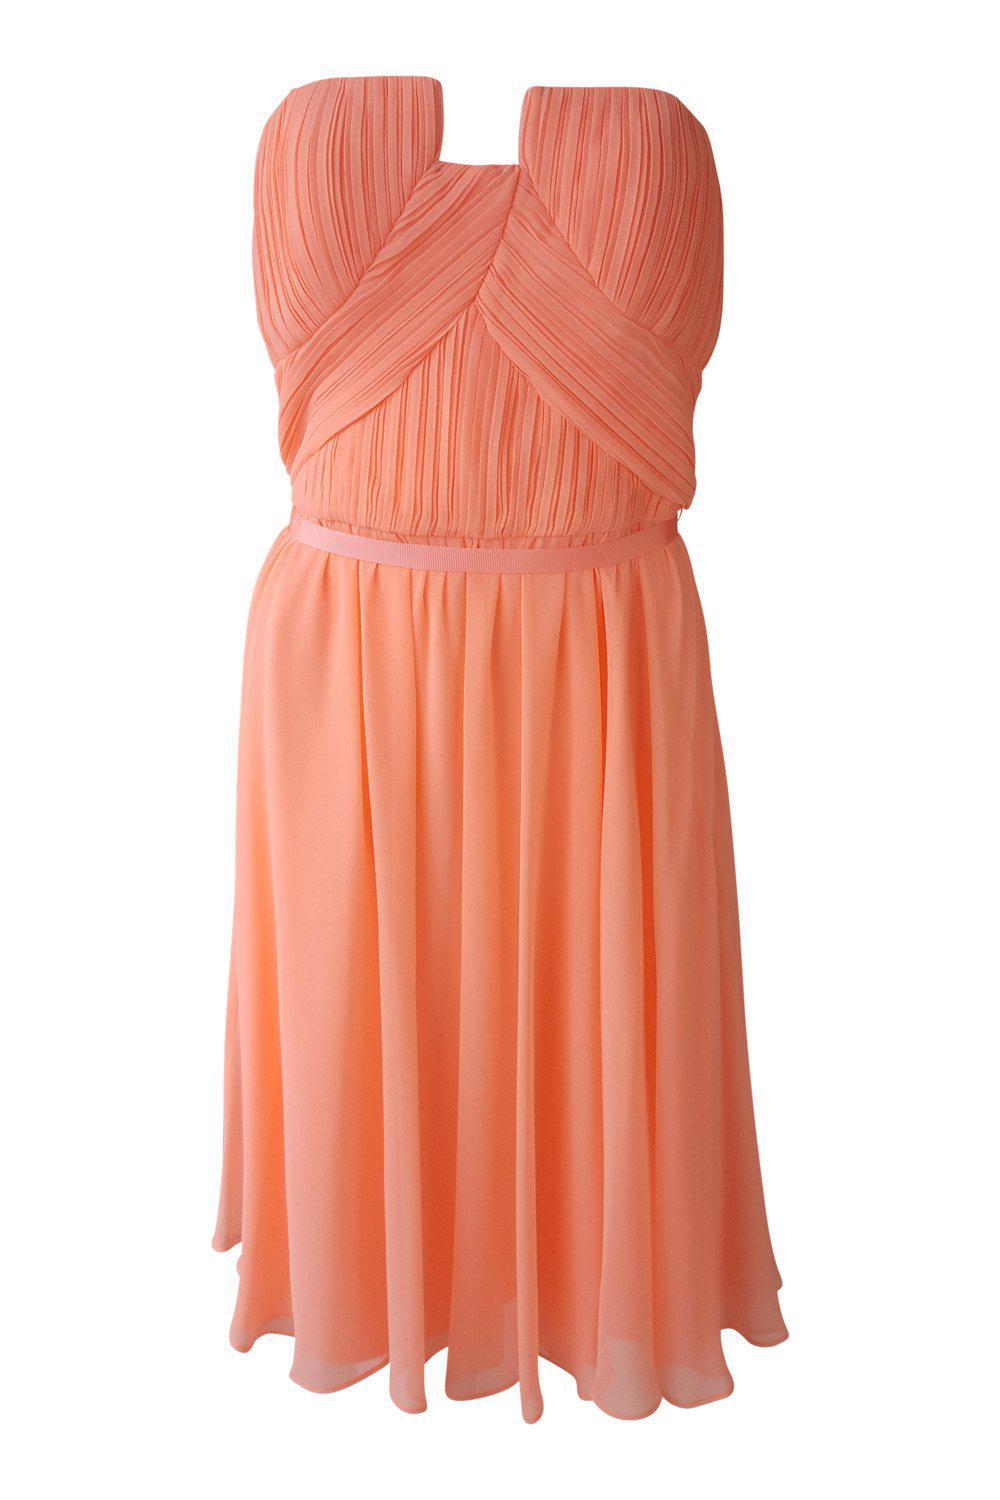 OASIS Neon Peach Pleated Bustier Fit and Flare Dress (UK 12)-Oasis-The Freperie